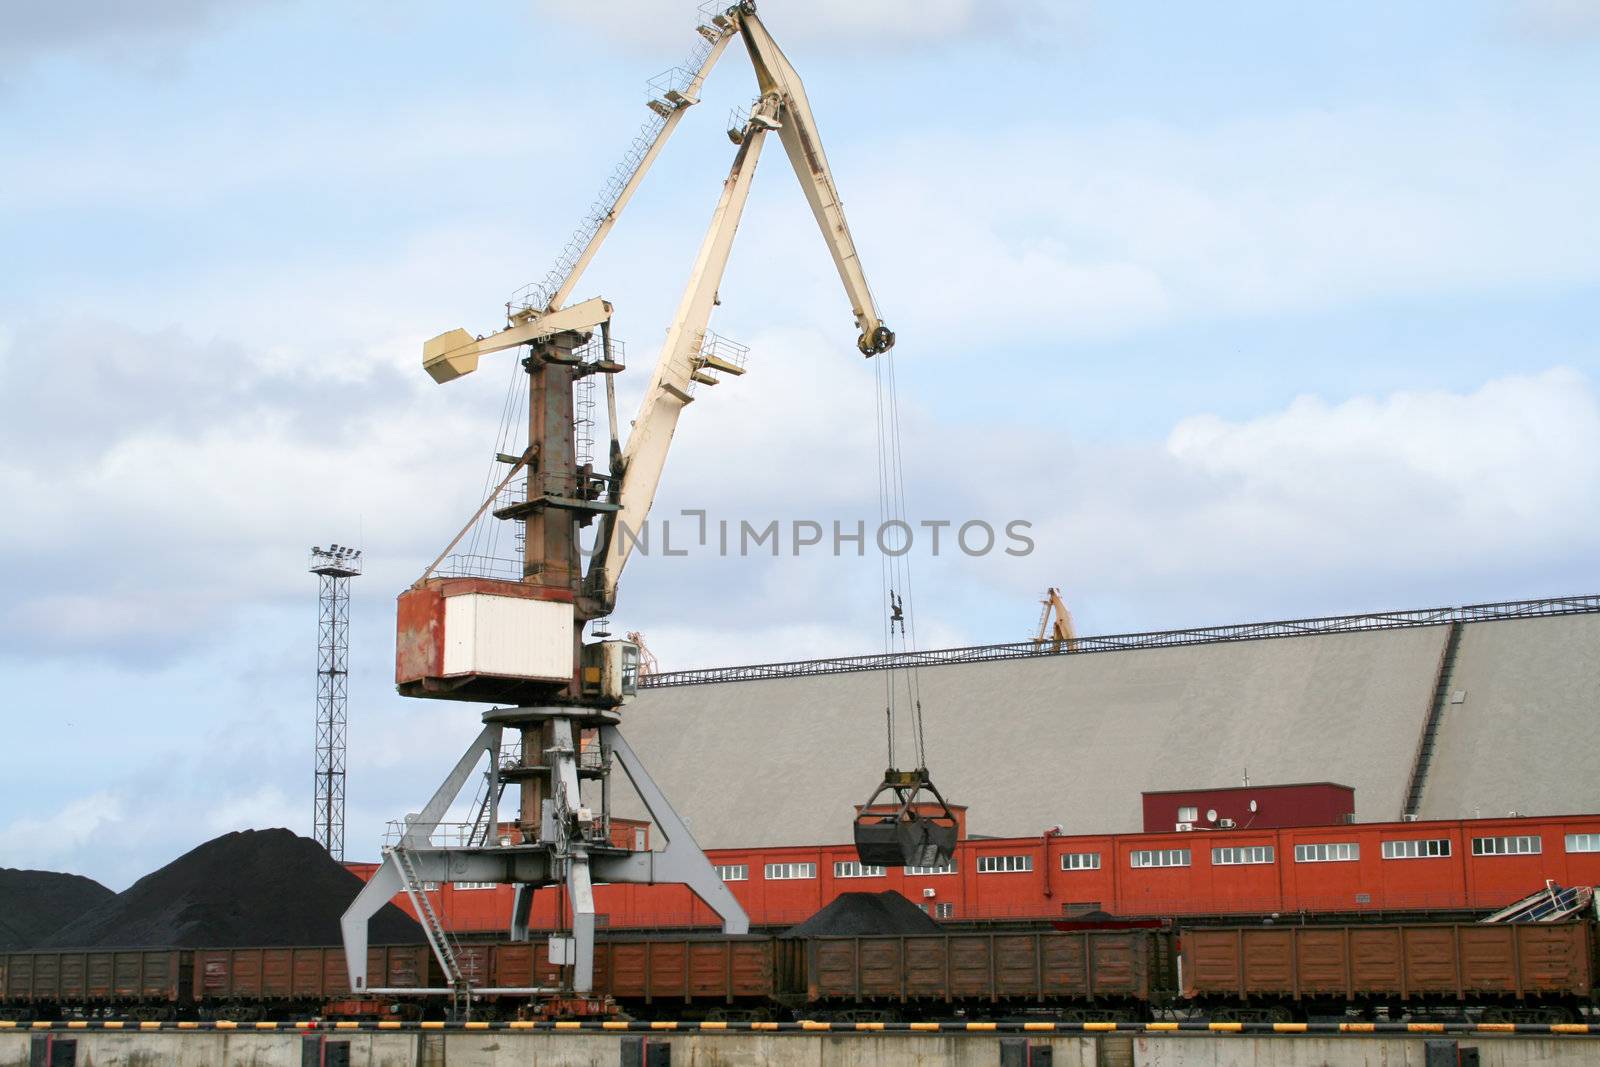 Container cranes for loading and unloading freight trains in Latvian port